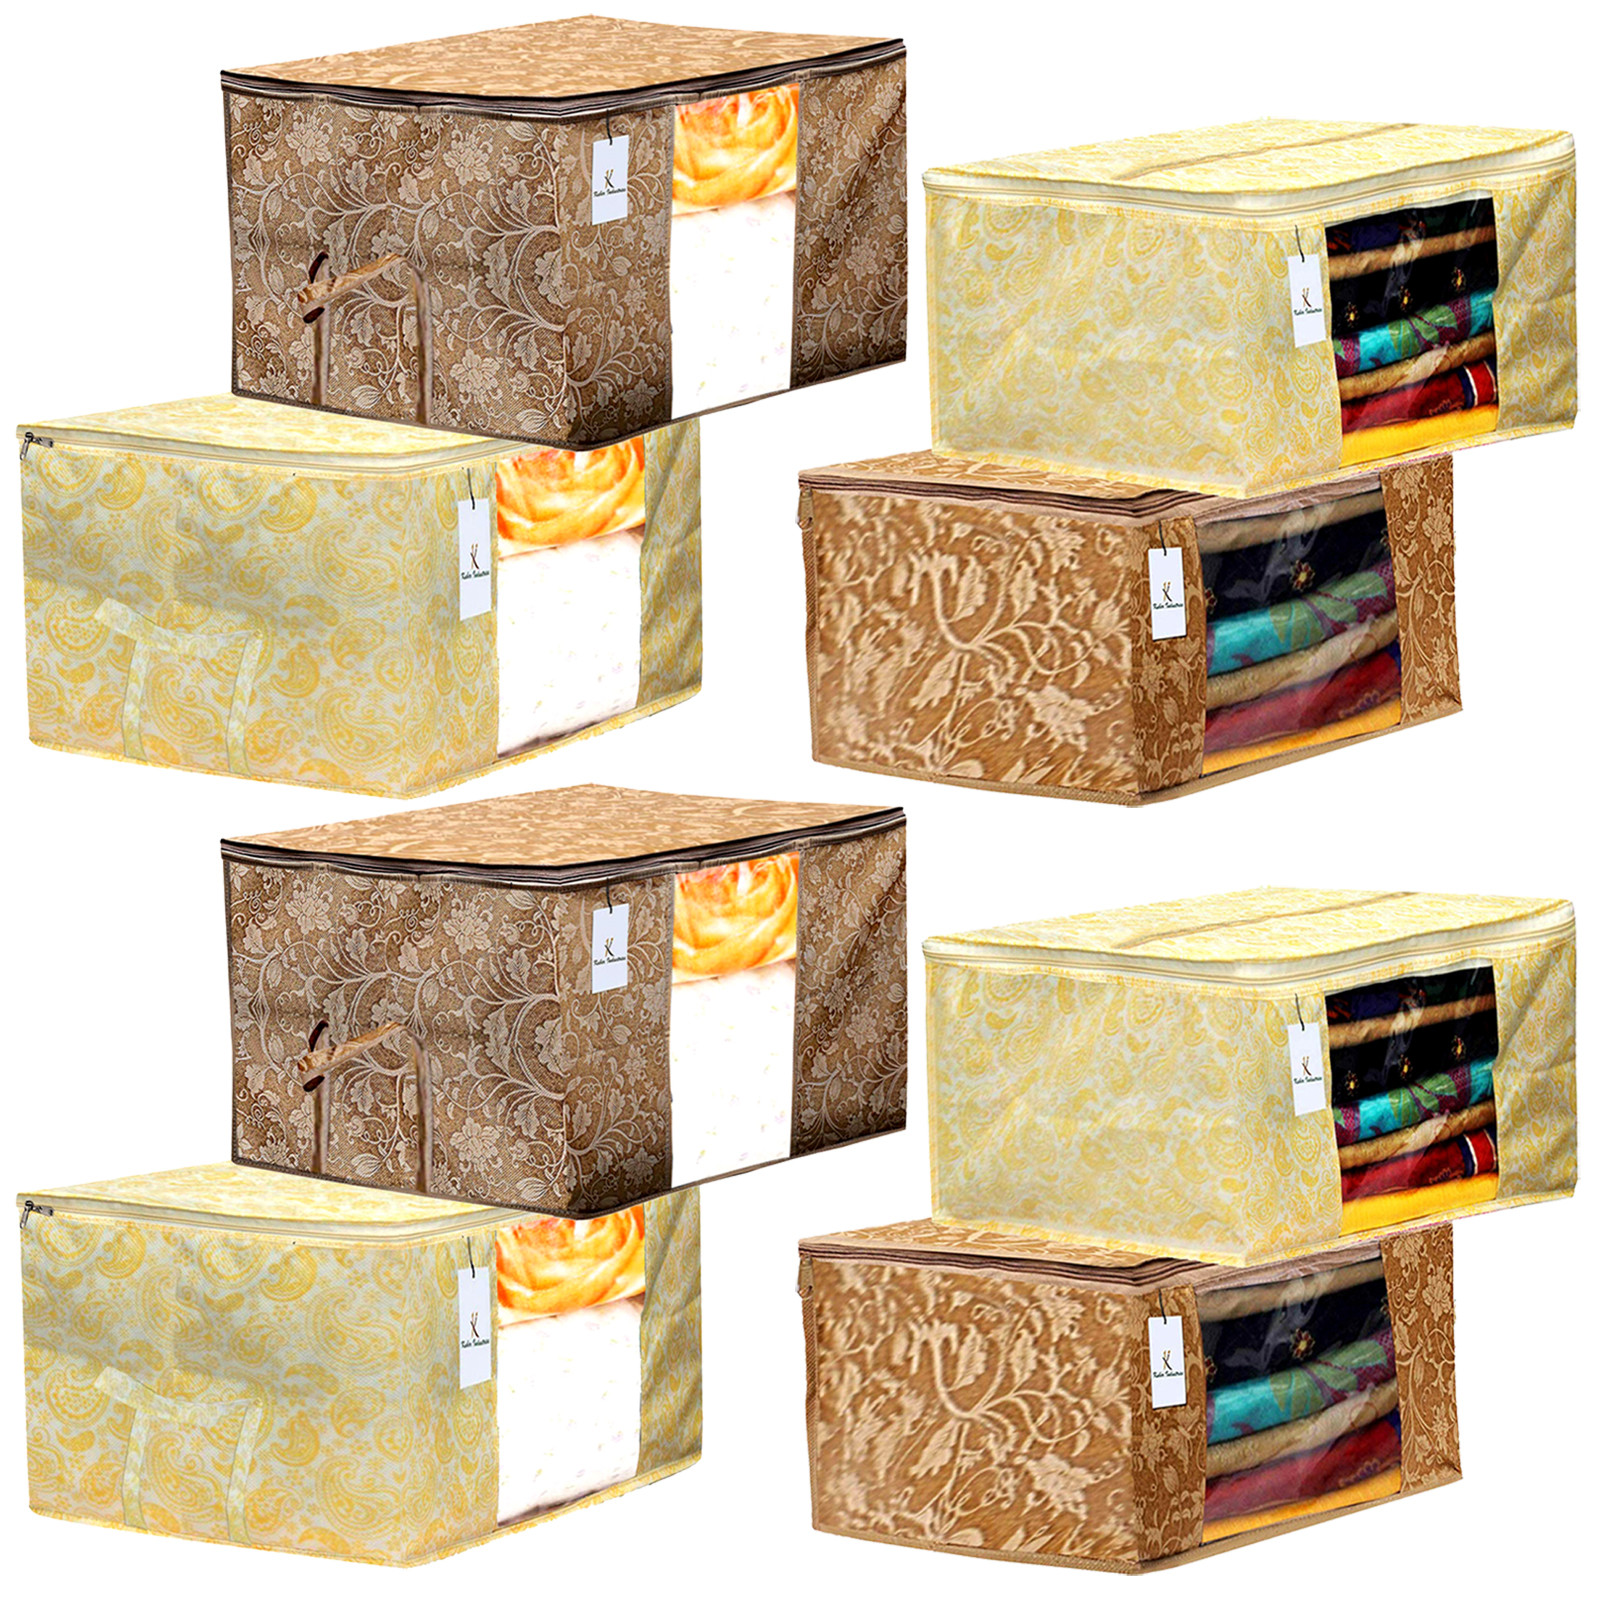 Kuber Industries Metalic Printed Non Woven Saree Cover And Underbed Storage Bag, Storage Organiser, Blanket Cover, Gold & Beige -CTKTC42387